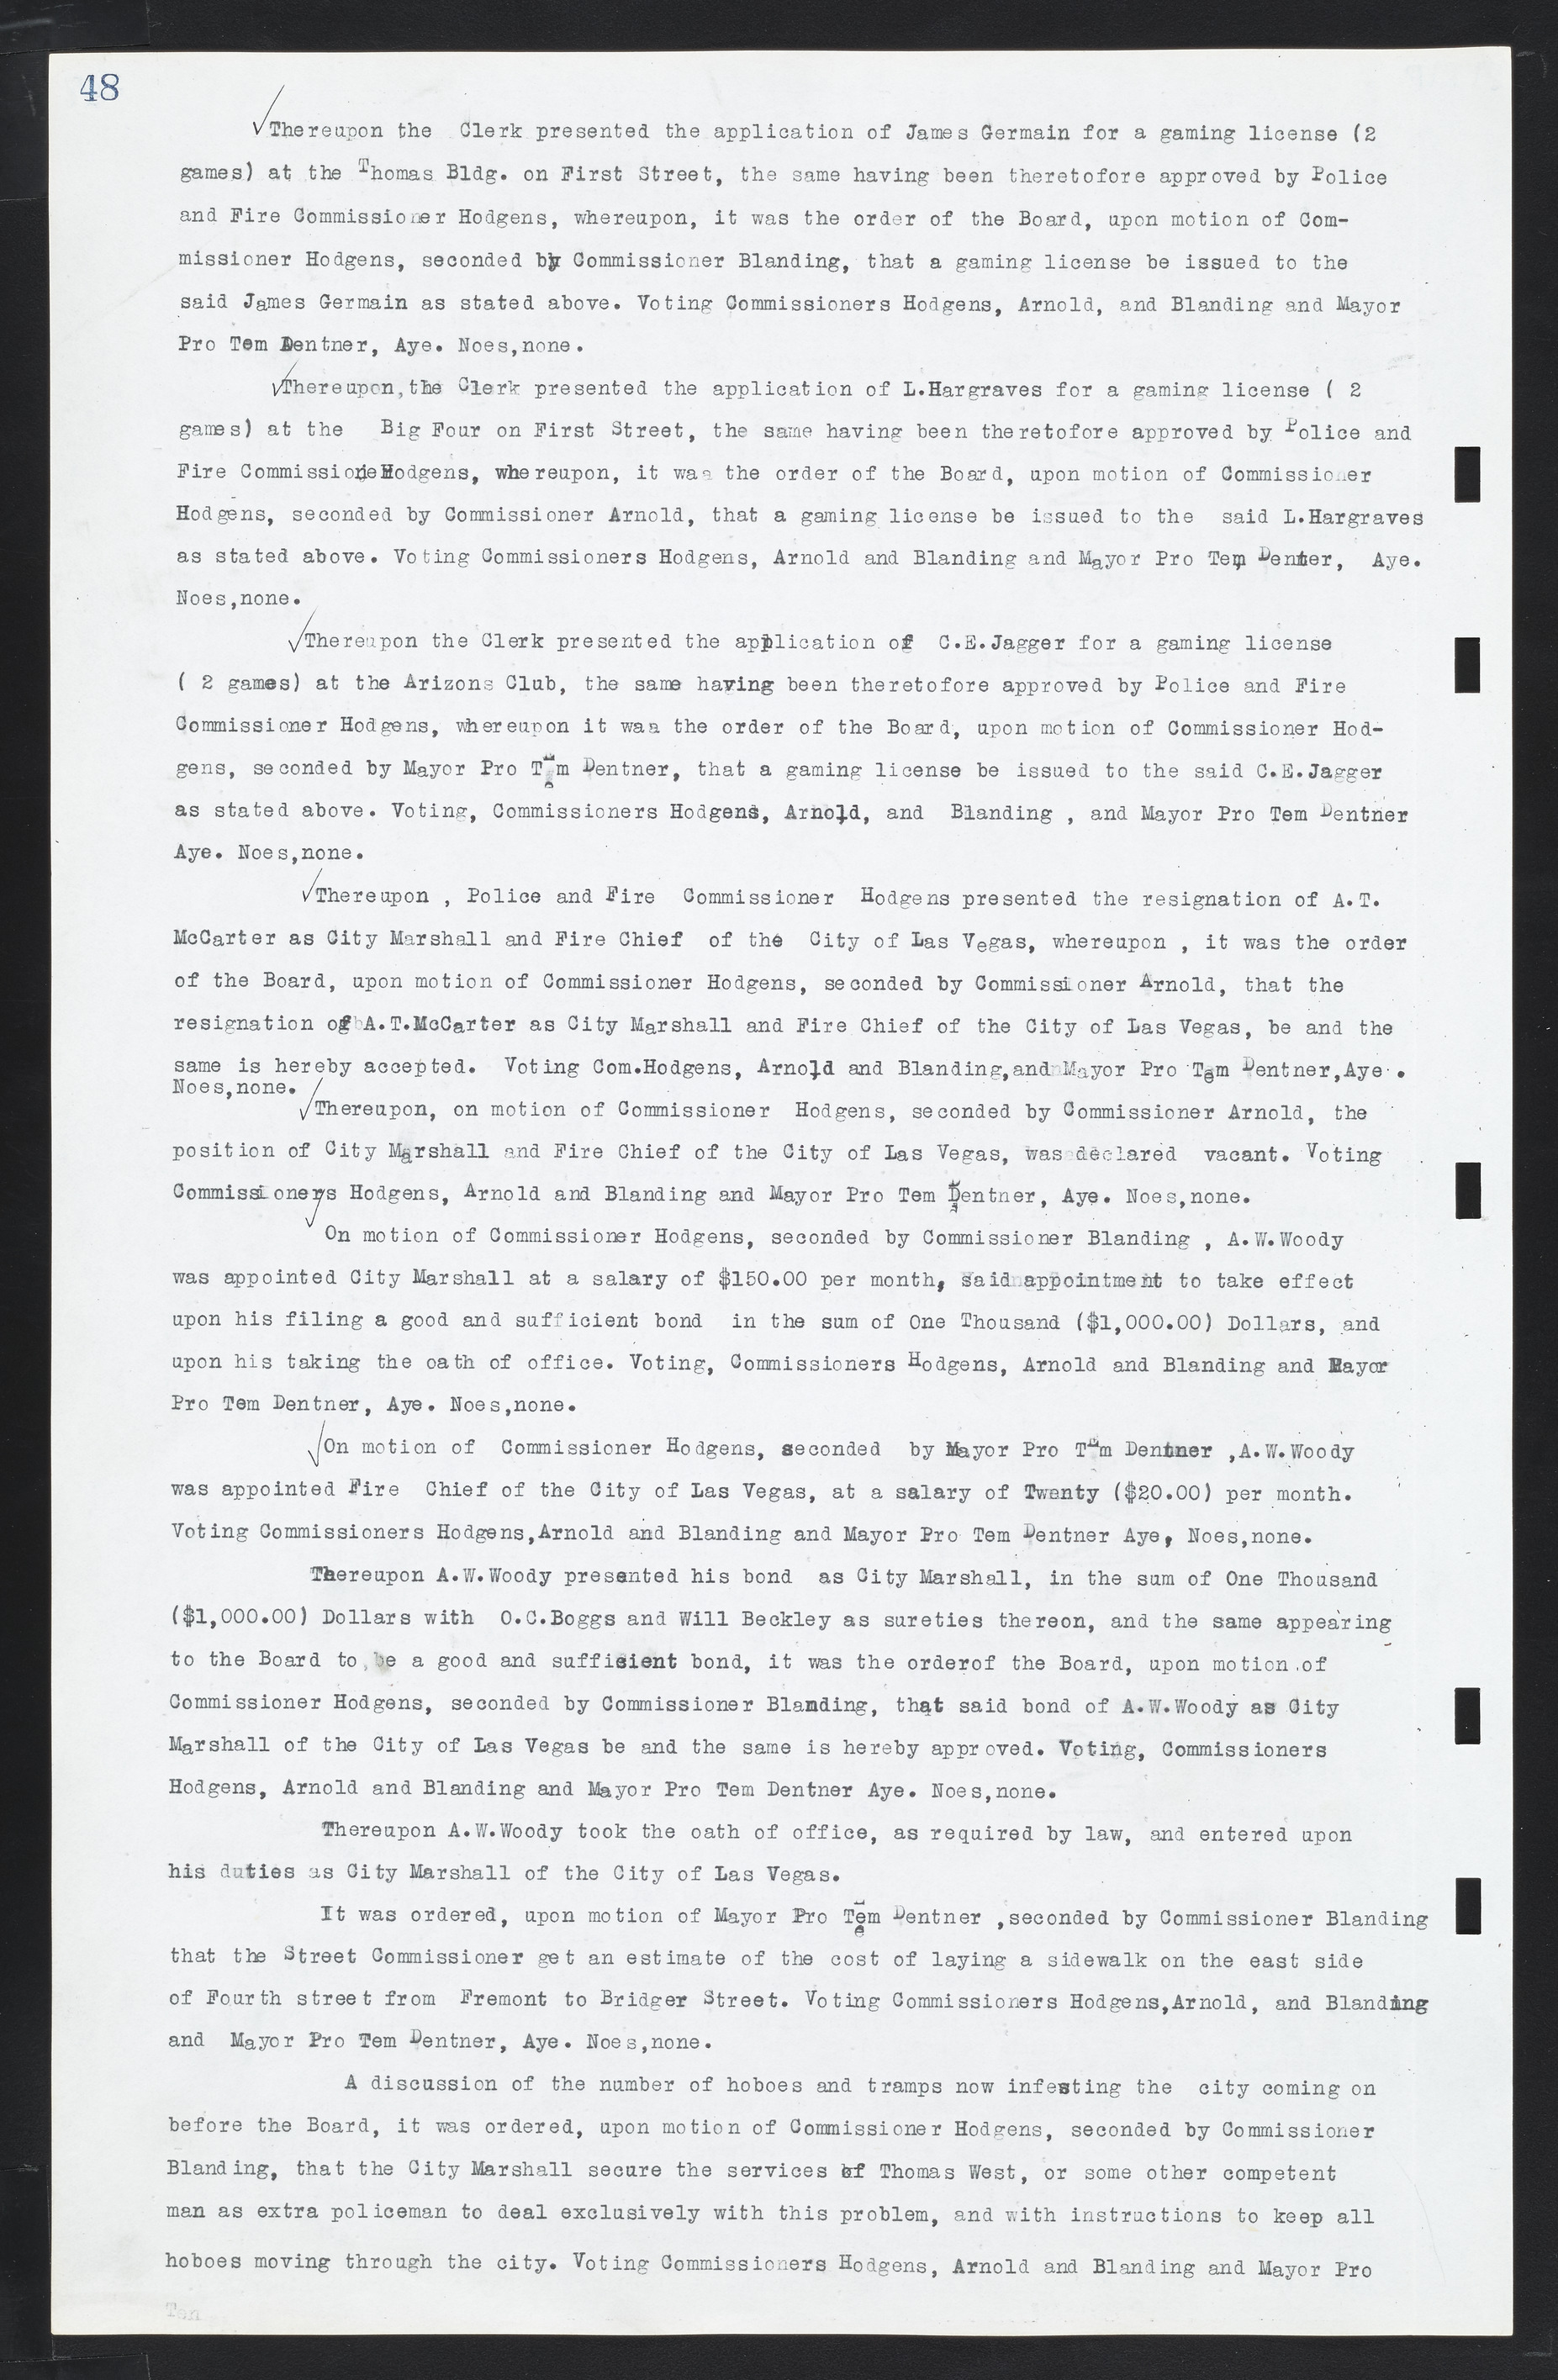 Las Vegas City Commission Minutes, March 1, 1922 to May 10, 1929, lvc000002-55